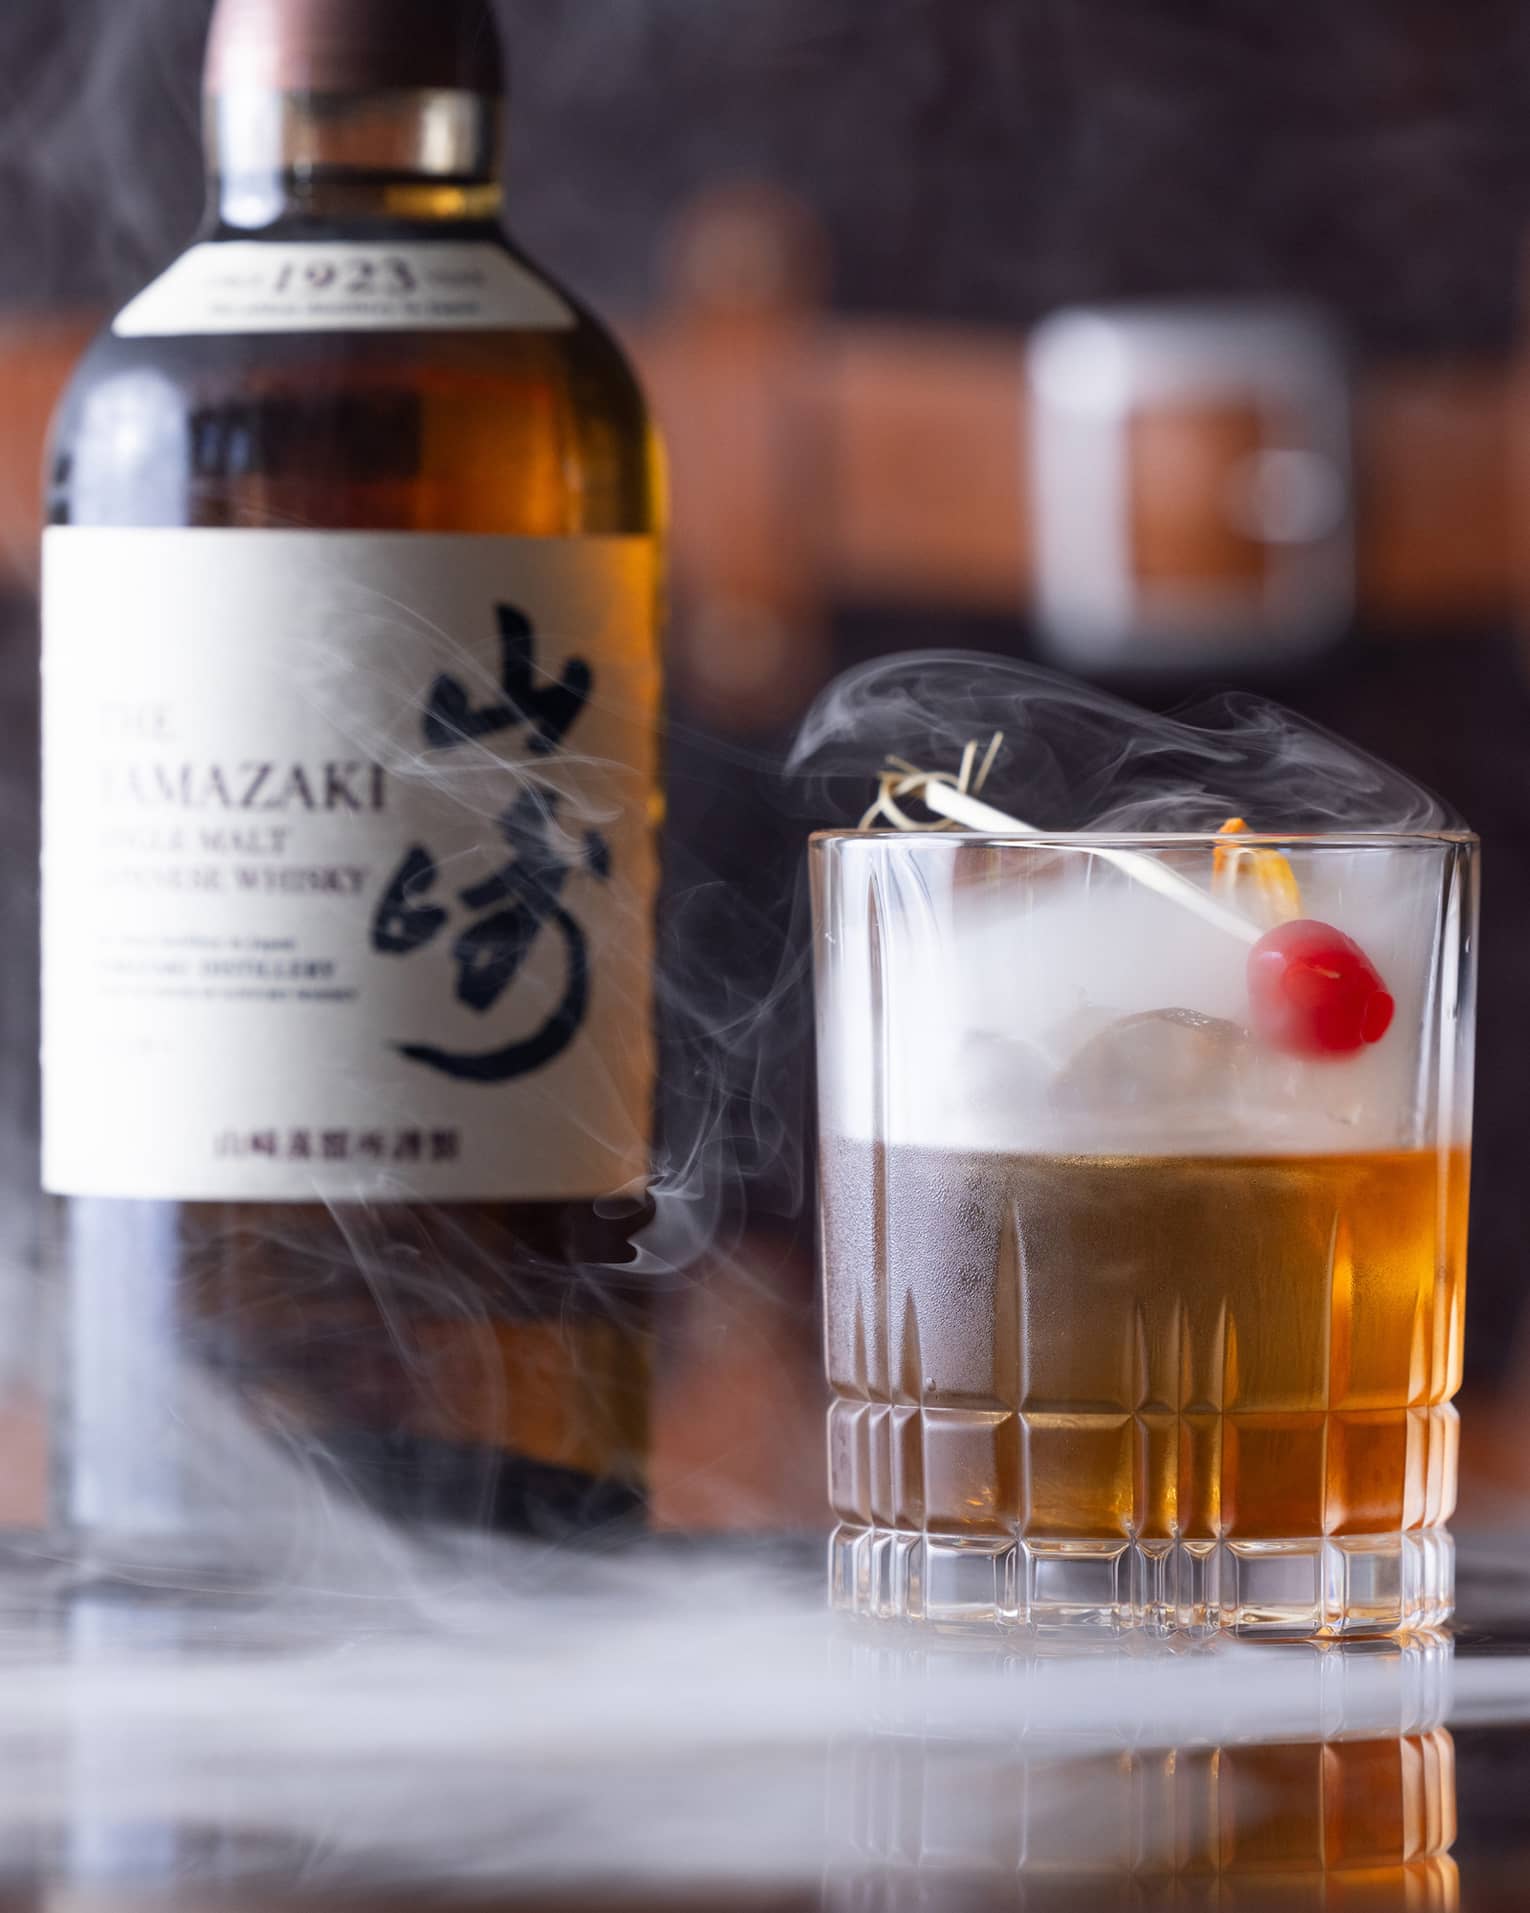 Bottle of Japanese whisky beside half-full cut-crystal glass with red cherry garnish, dry ice mist swirling from the glass.